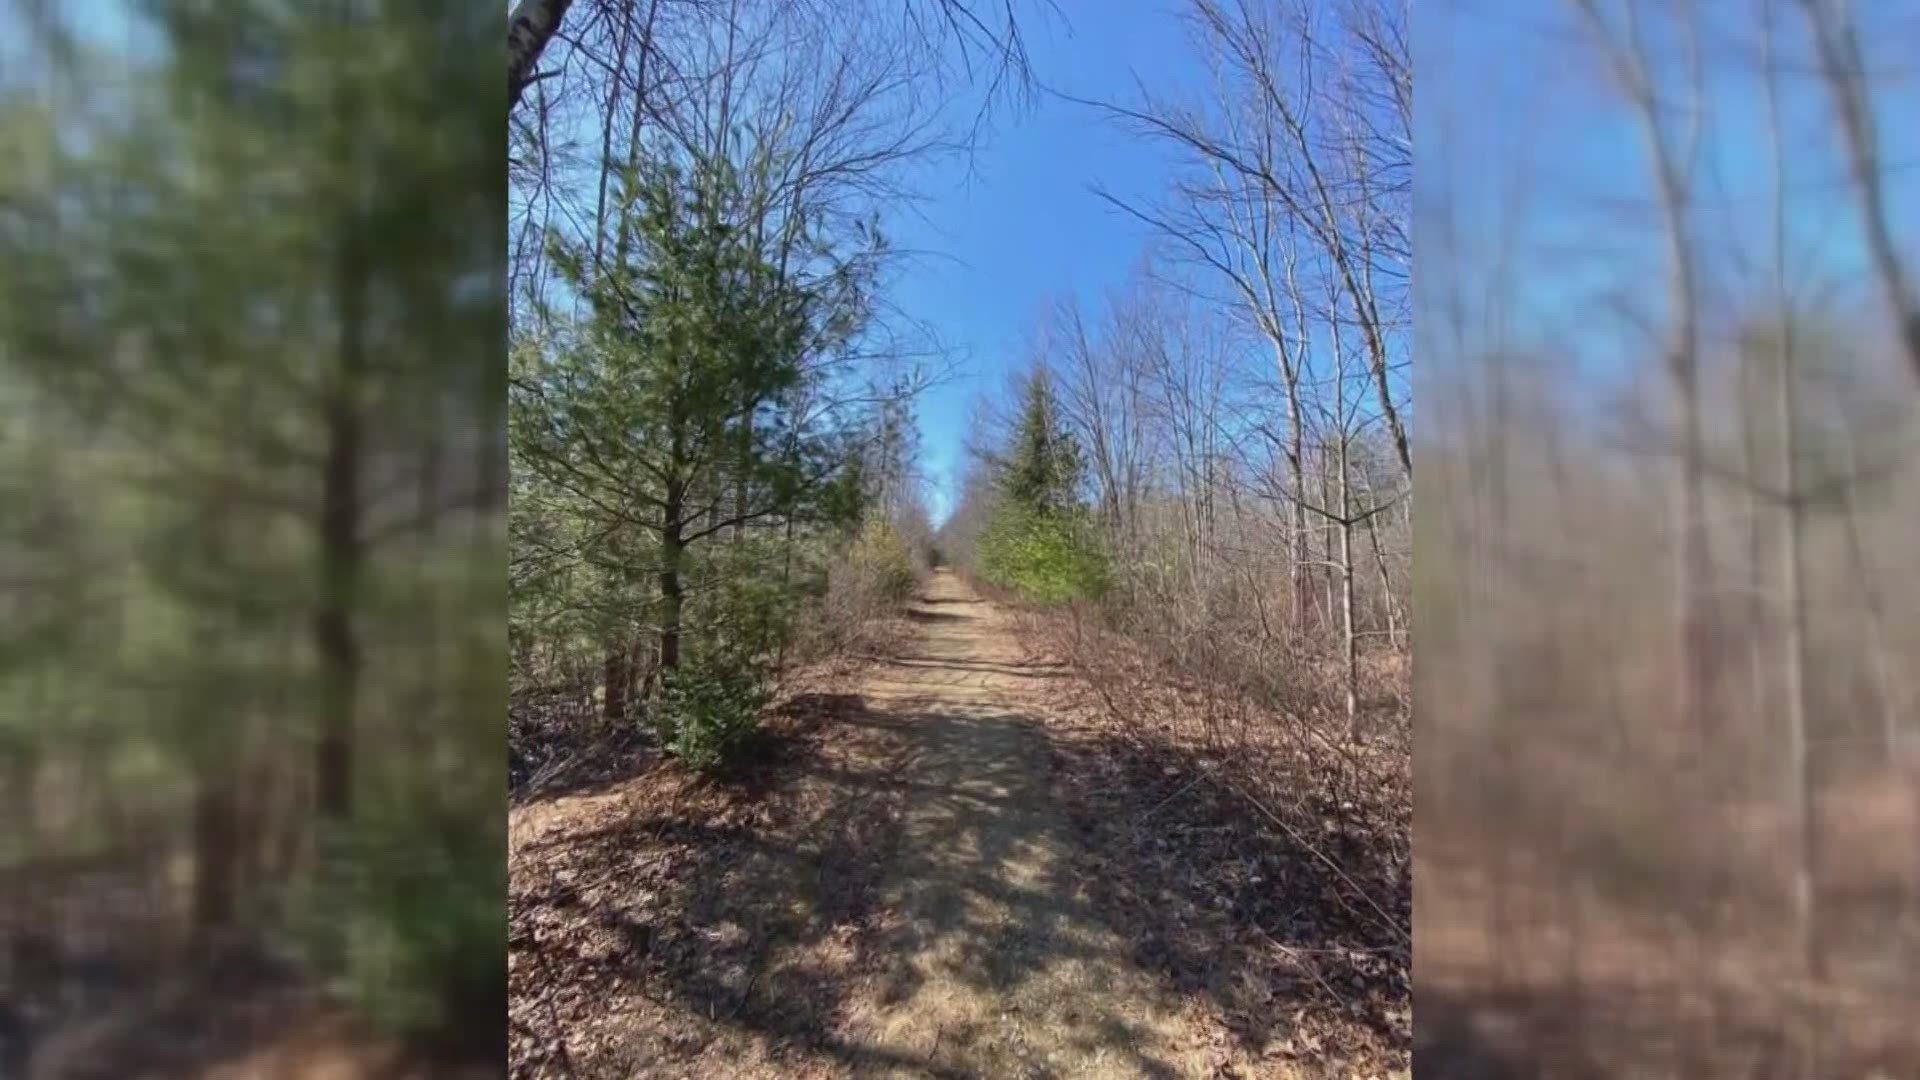 Mainers are still allowed to go hiking during Gov. Mills stay at home order, and more and more people are hitting the trails.